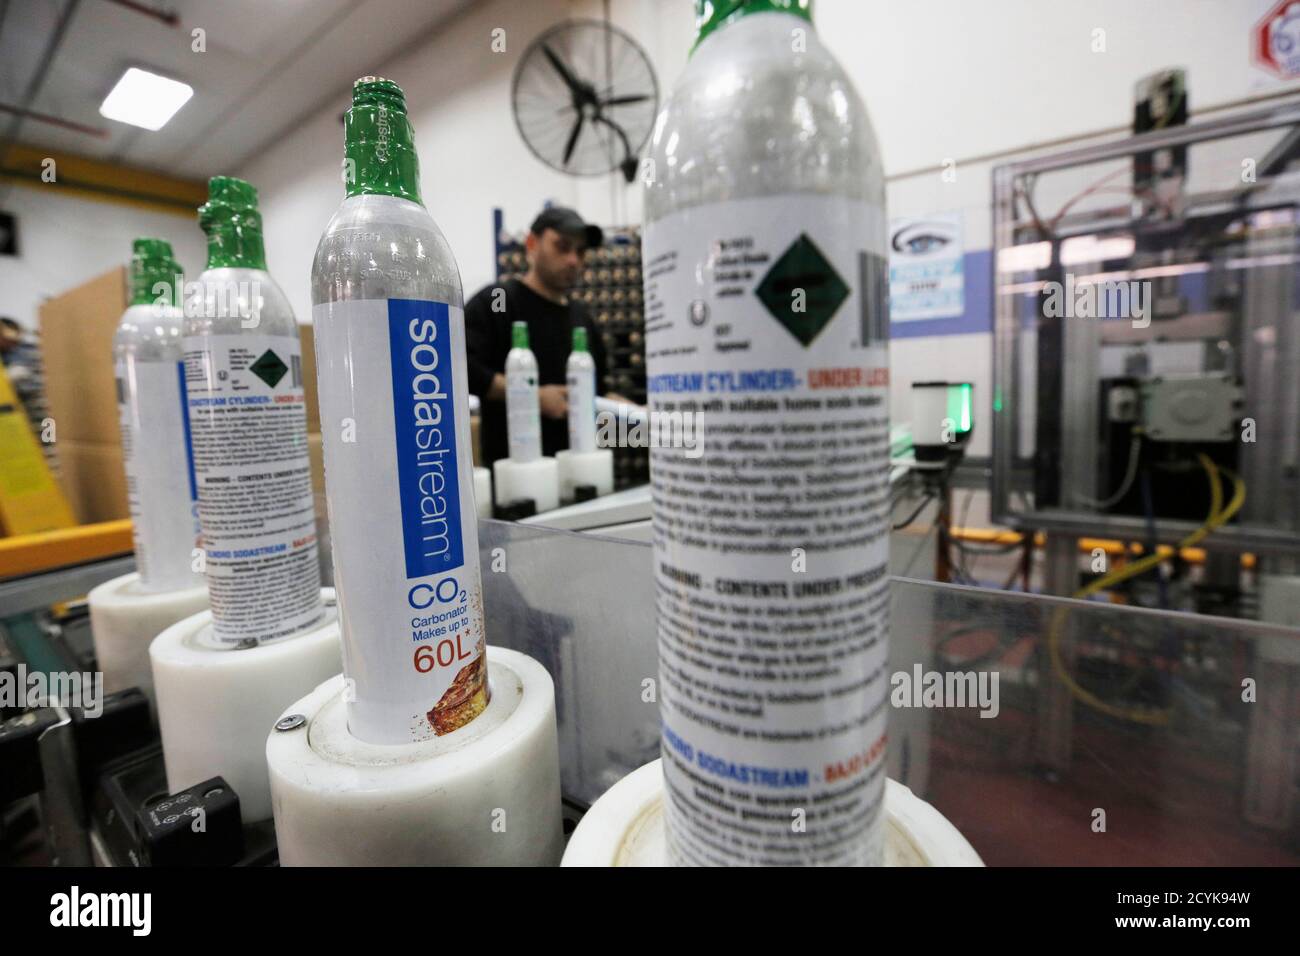 Carbonator bottles are seen at the SodaStream factory in the West Bank Jewish settlement of Maale Adumim January 28, 2014. Appliance maker SodaStream International Ltd scored big in nabbing A-list actress Scarlett Johansson as its global brand ambassador in time for this year's Super Bowl advertising bonanza. But the limelight can be harsh. While the multi-million dollar deal may have increased brand awareness, it also strengthened calls for a boycott of the Israel-based company, whose main factory lies in a Jewish settlement deep in the occupied West Bank. Picture taken January 28, 2014. To m Stock Photo